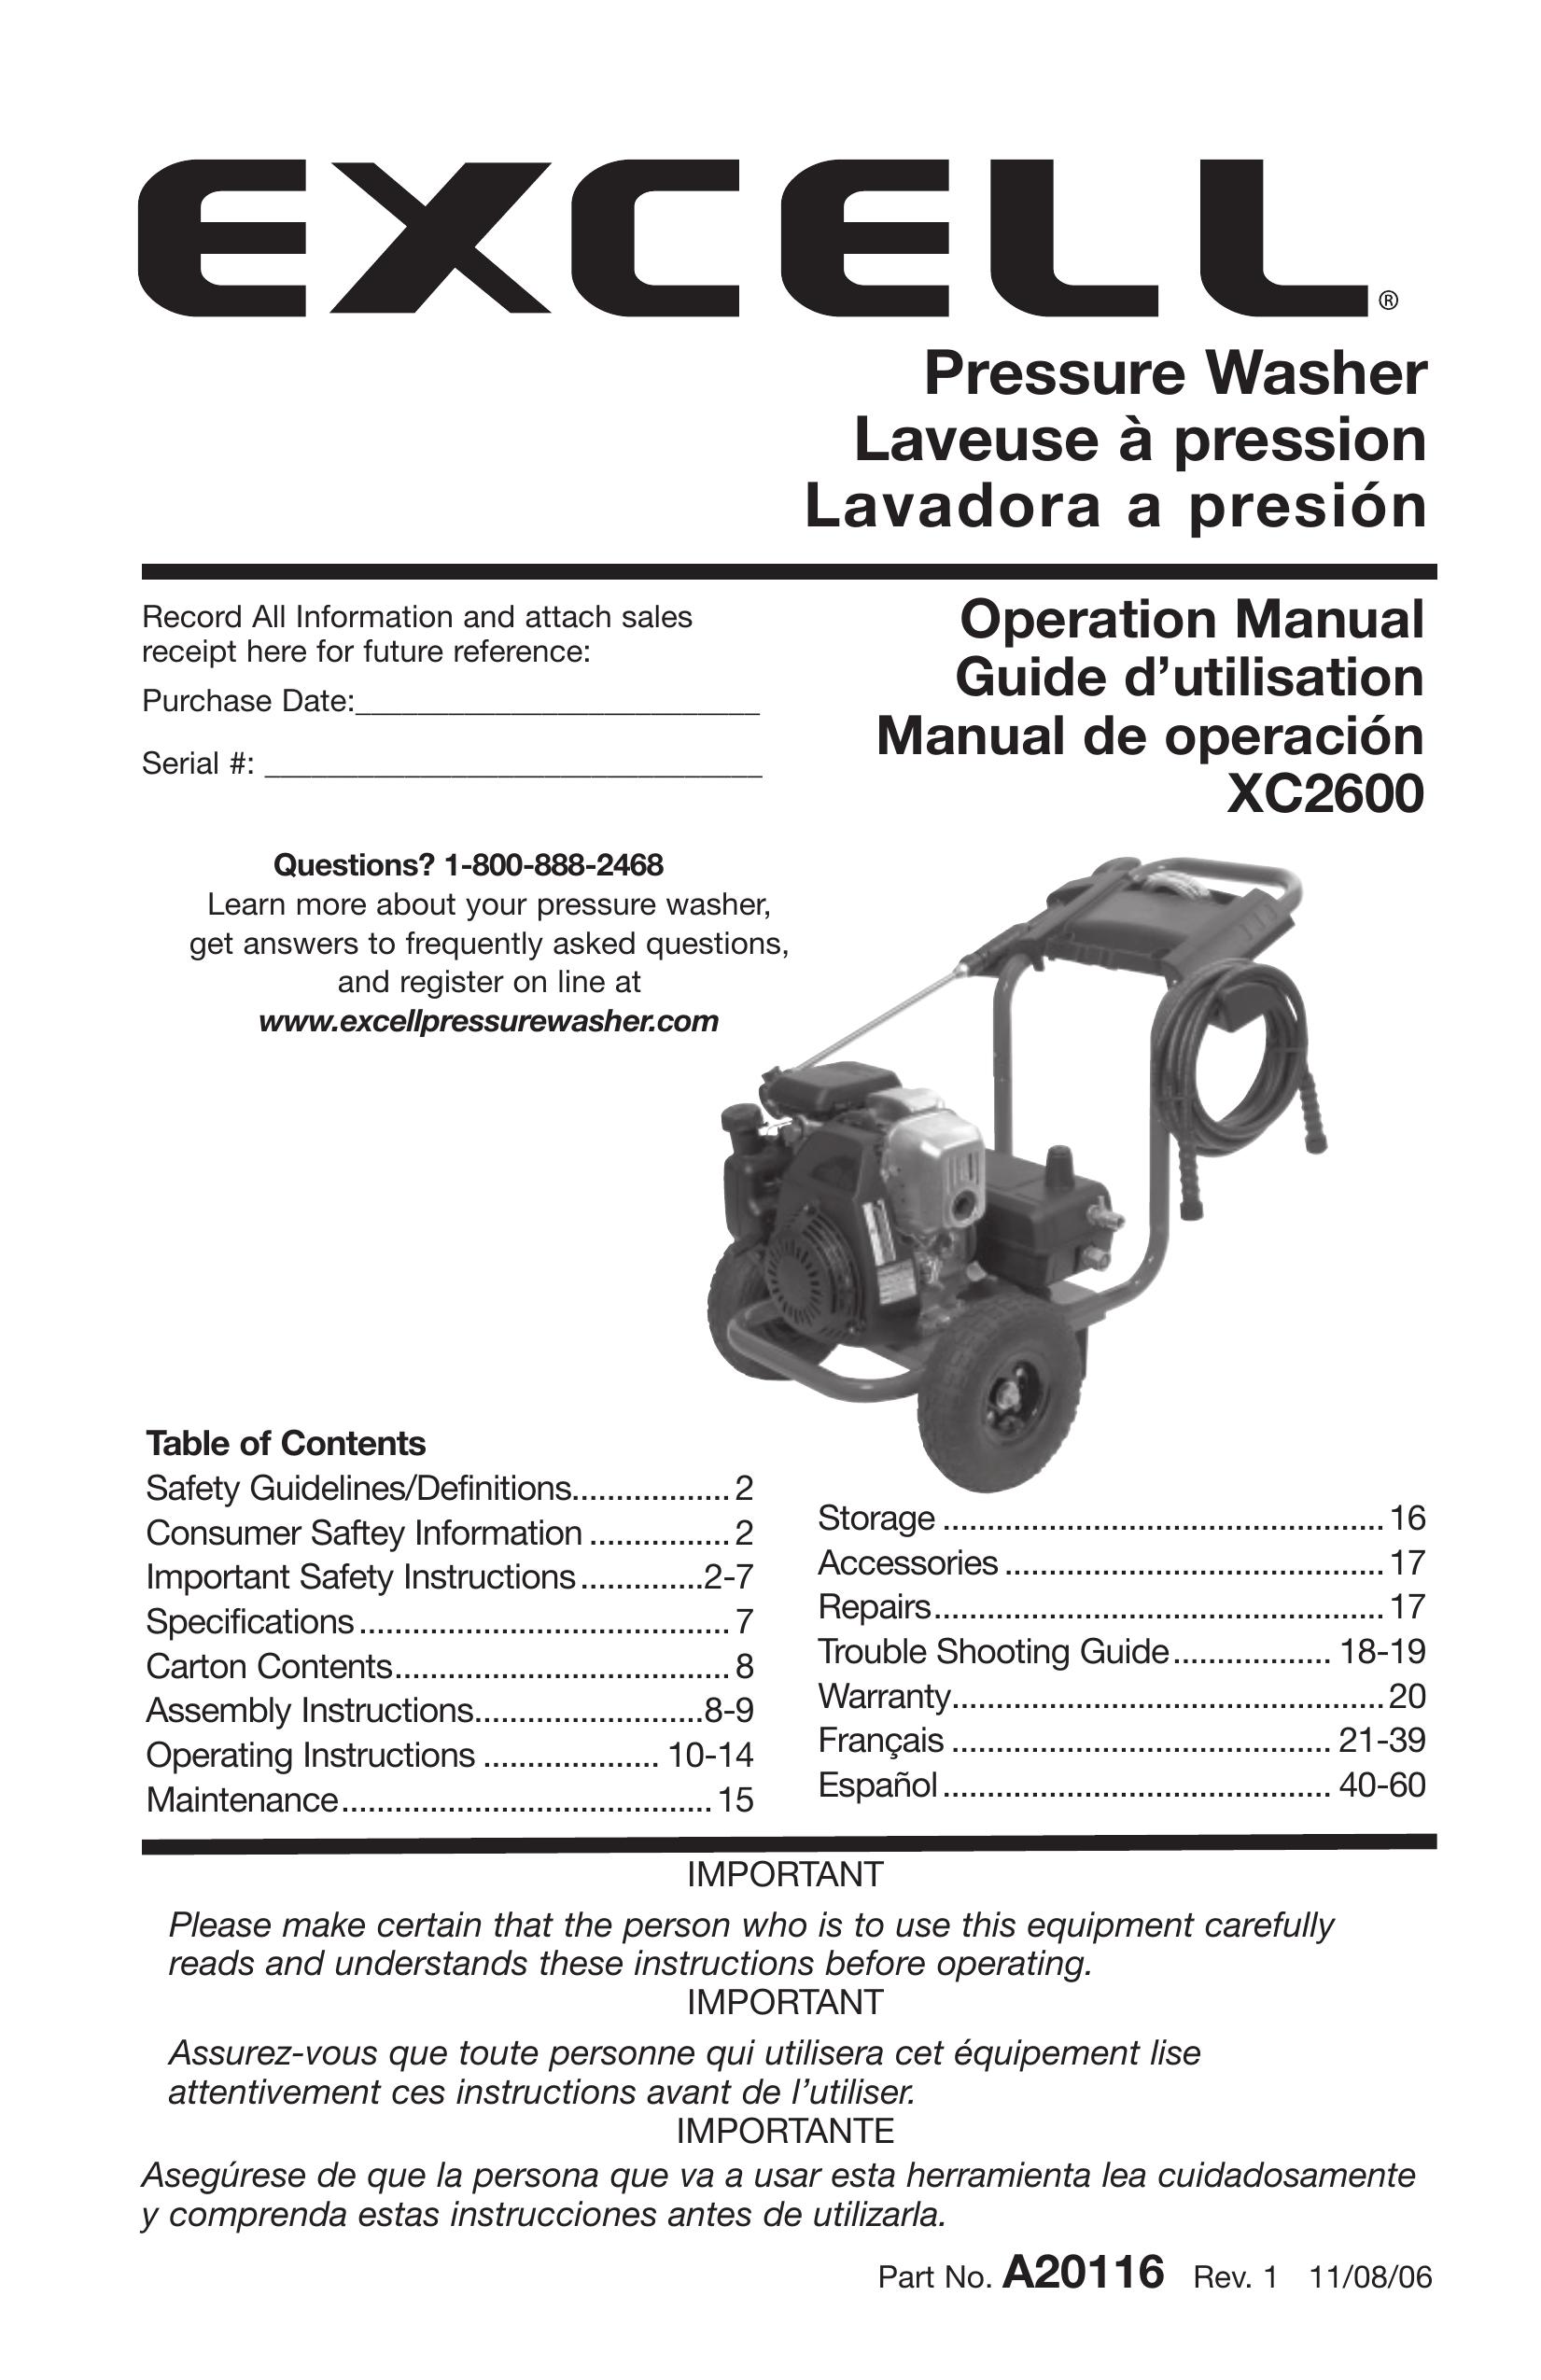 DeVillbiss Air Power Company A20116 Pressure Washer User Manual